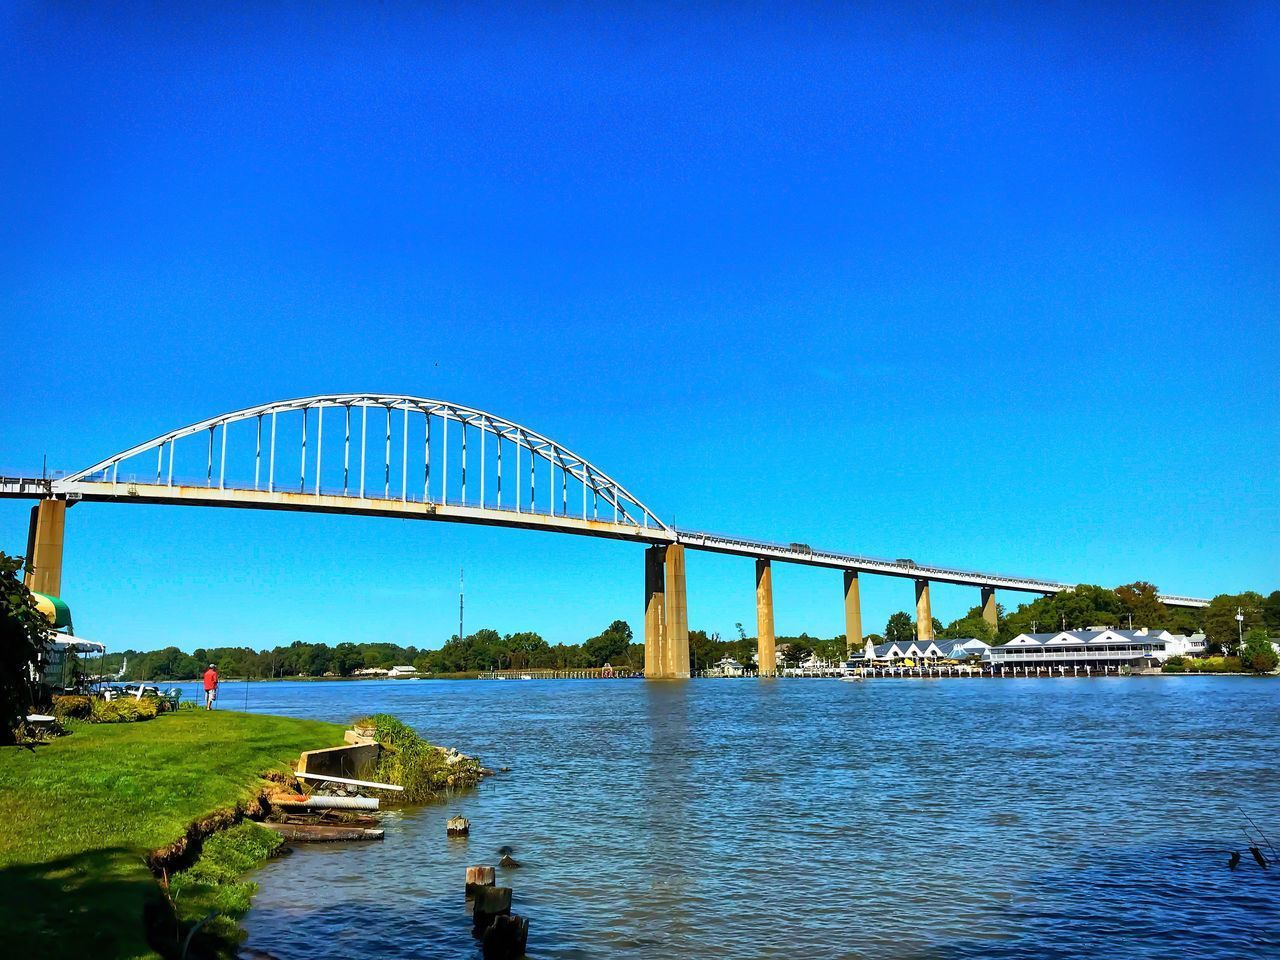 VIEW OF BRIDGE OVER RIVER AGAINST BLUE SKY